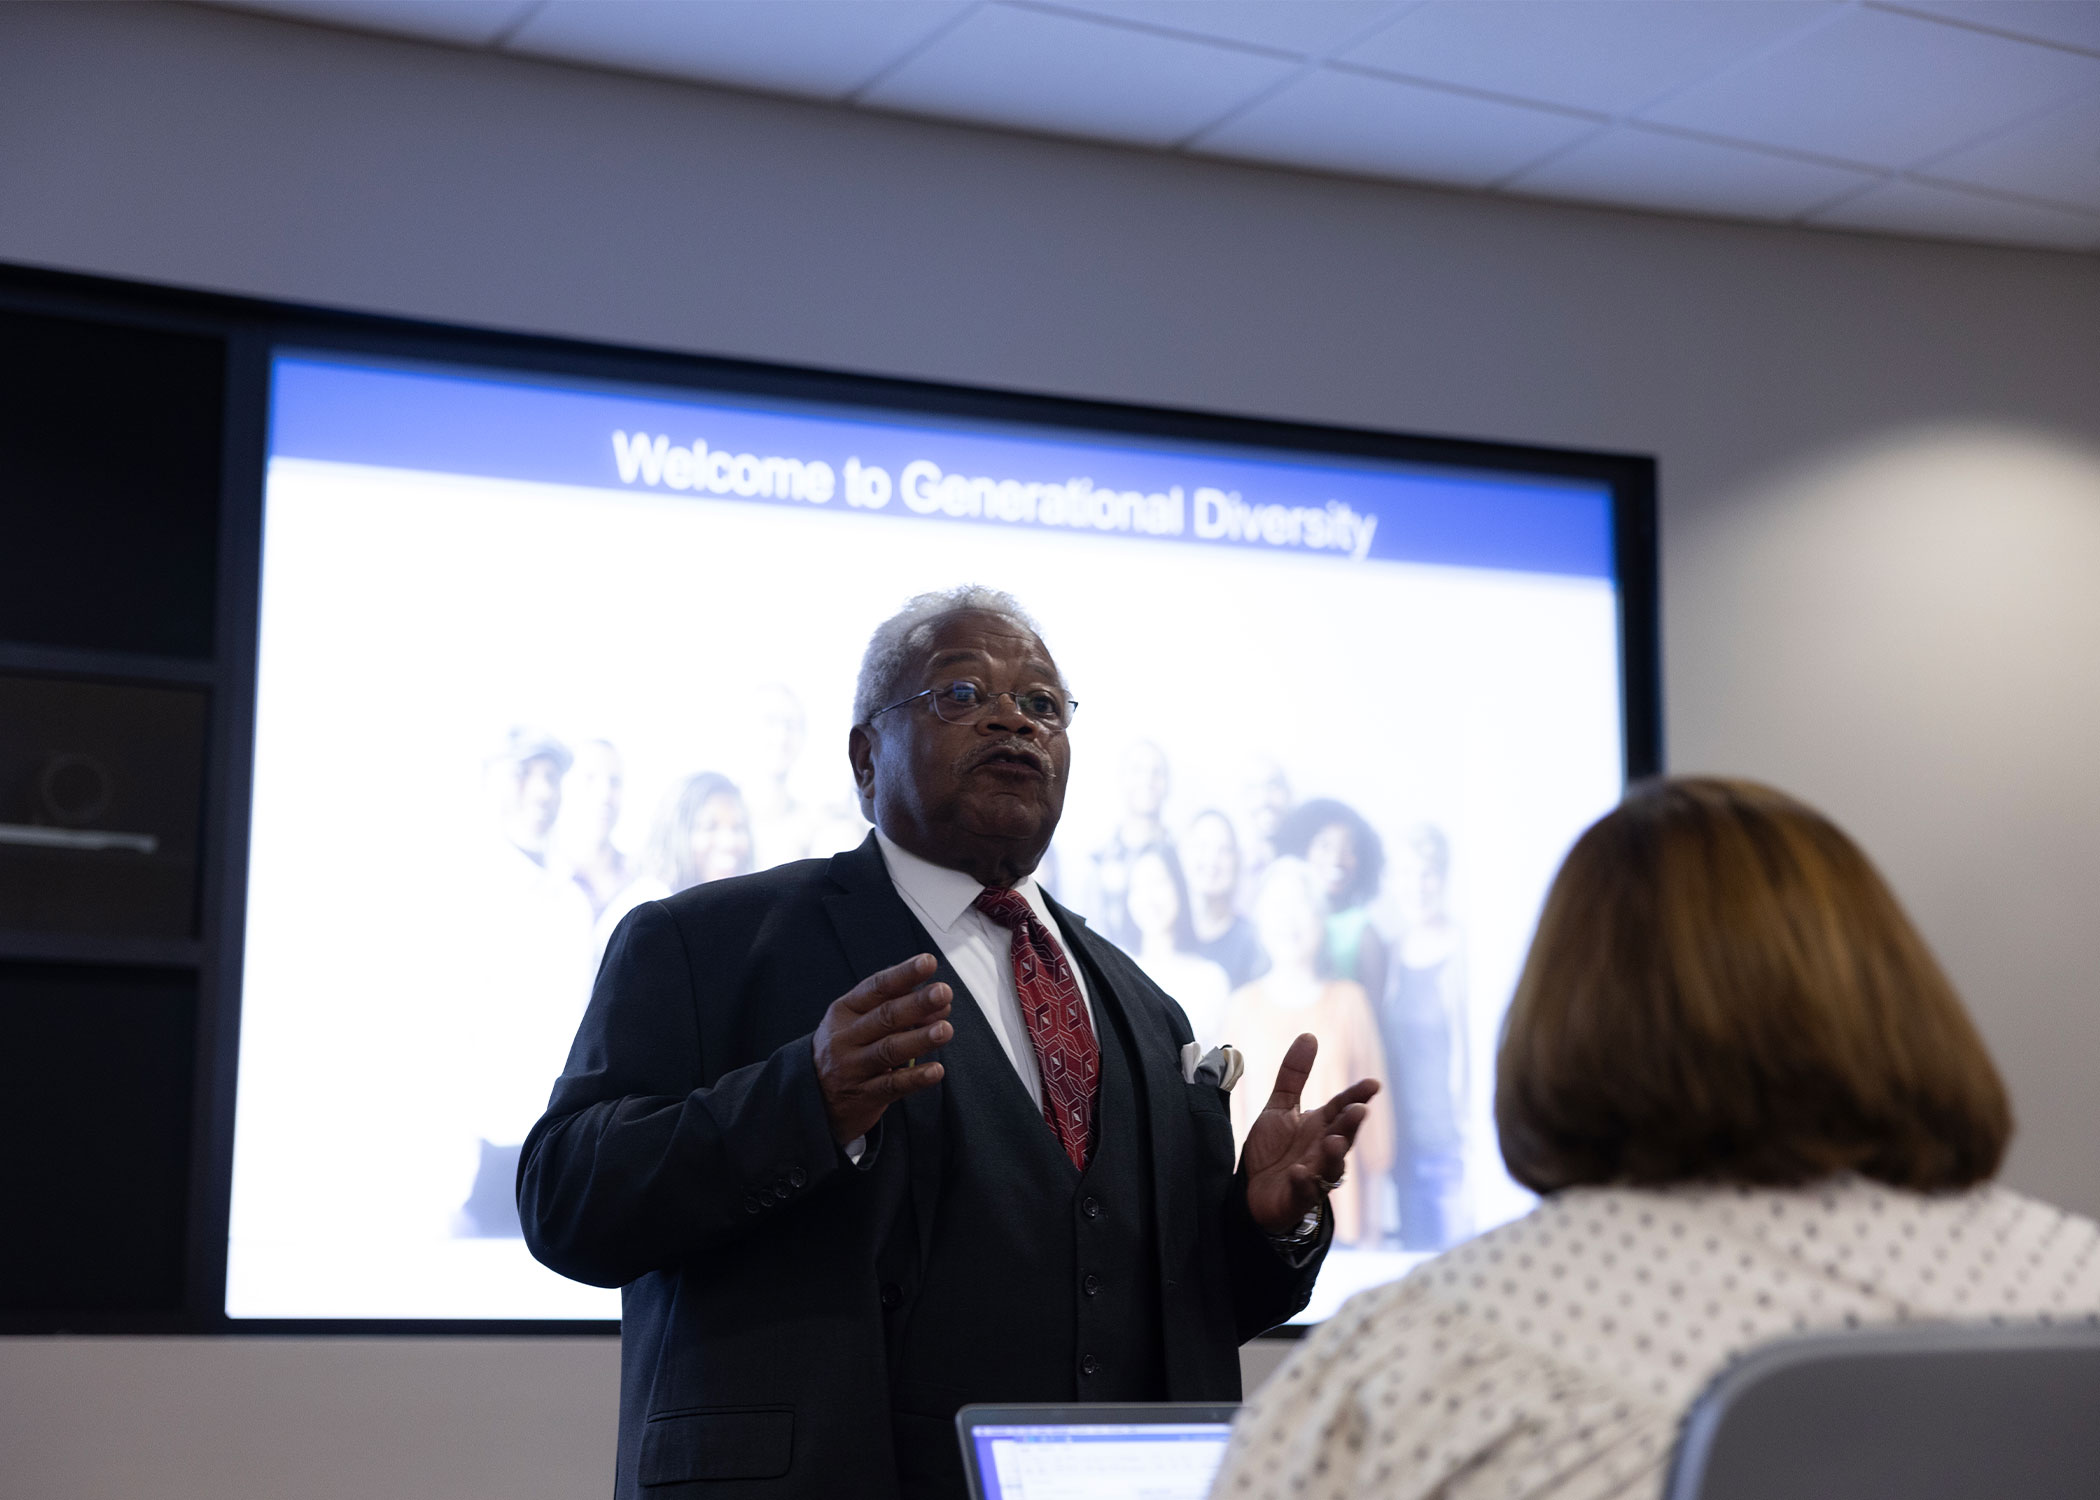 Ron Harris lecturing in front of a projected image titled Welcome to Generational Diversity.